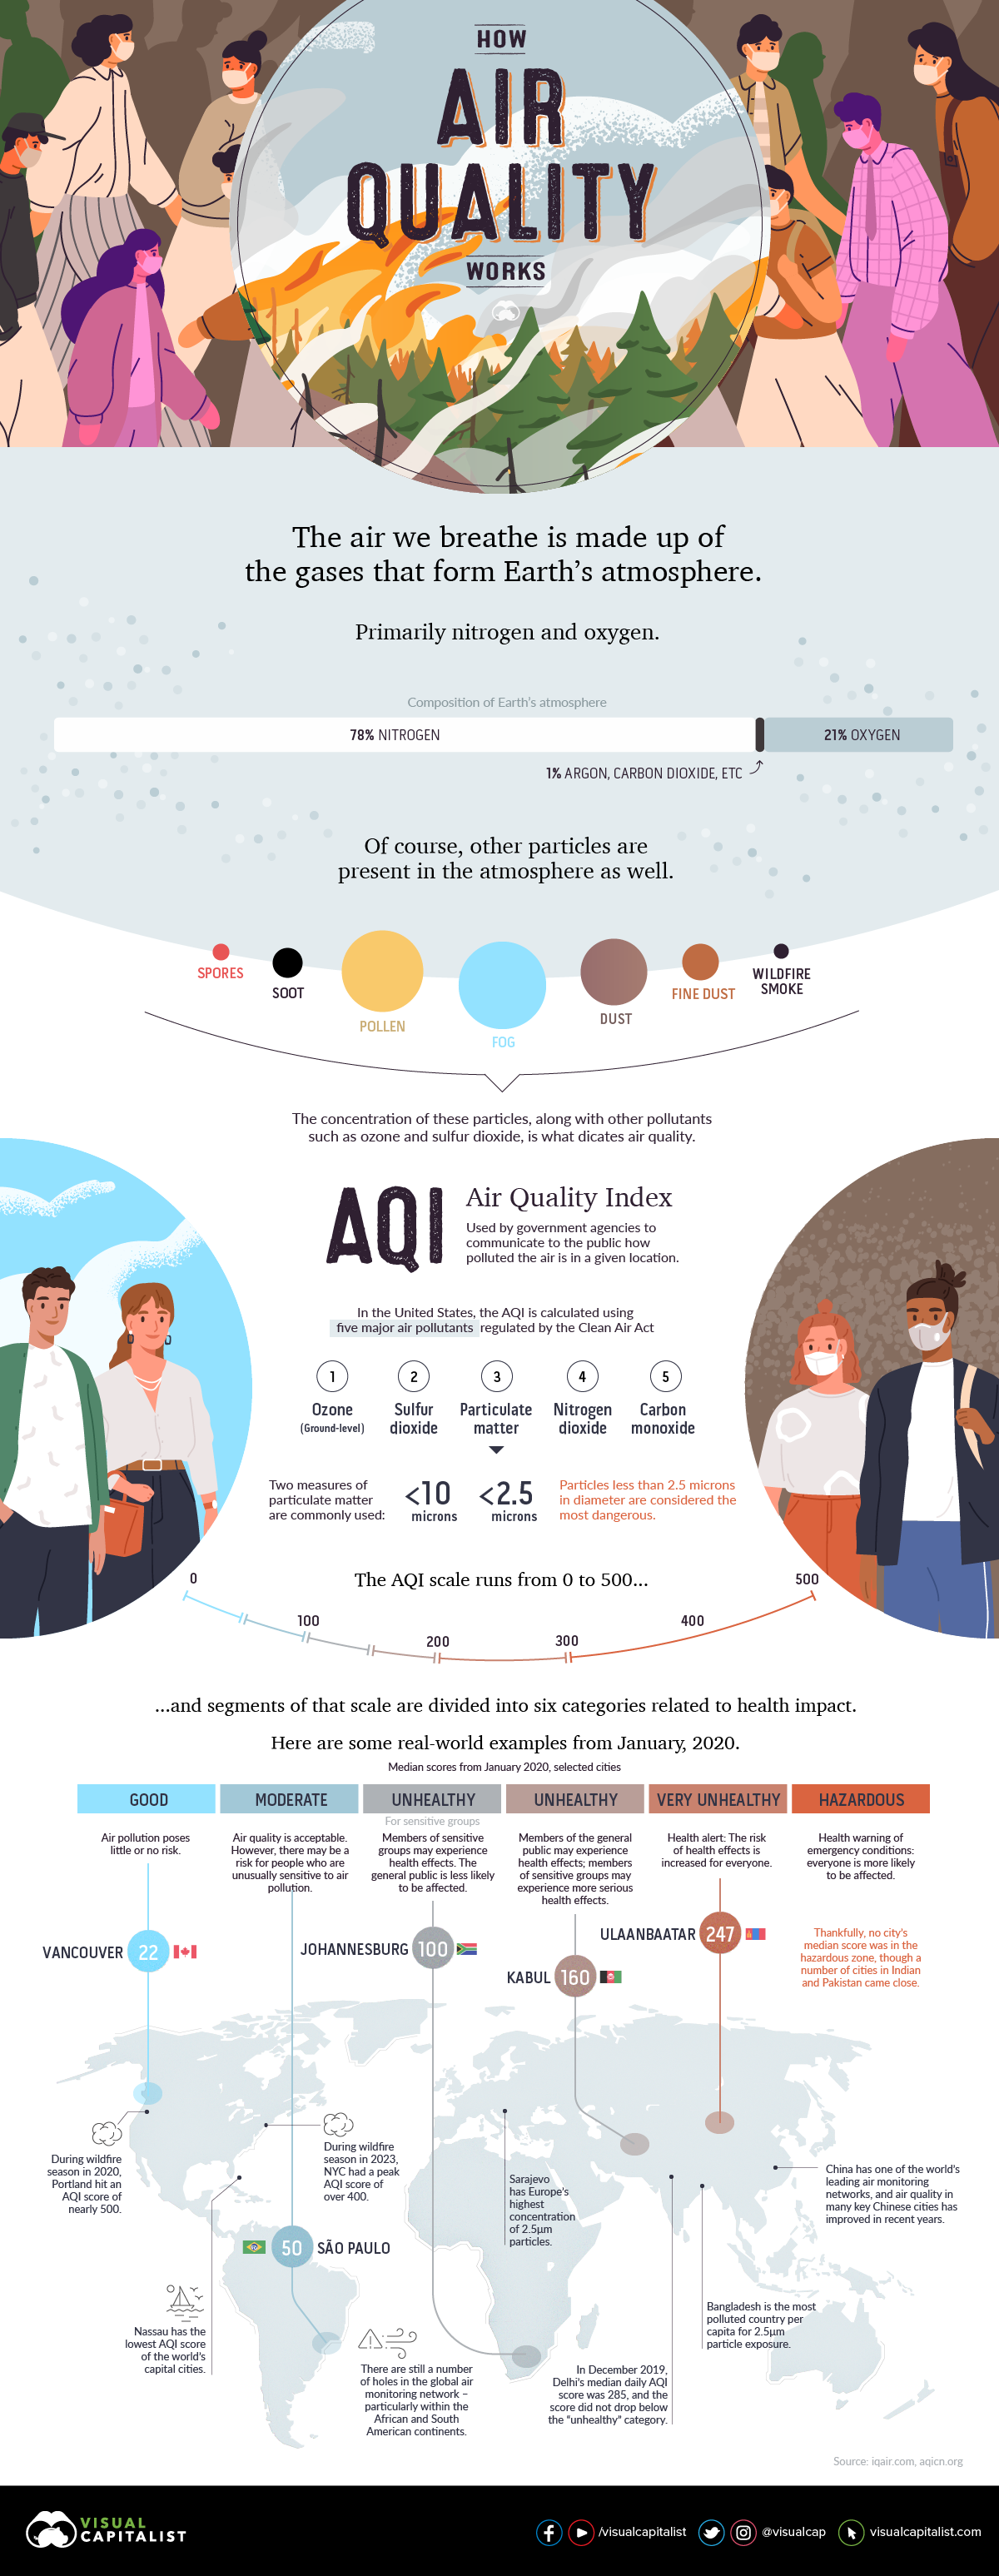 Infographic explaining how the air quality index (AQI) works